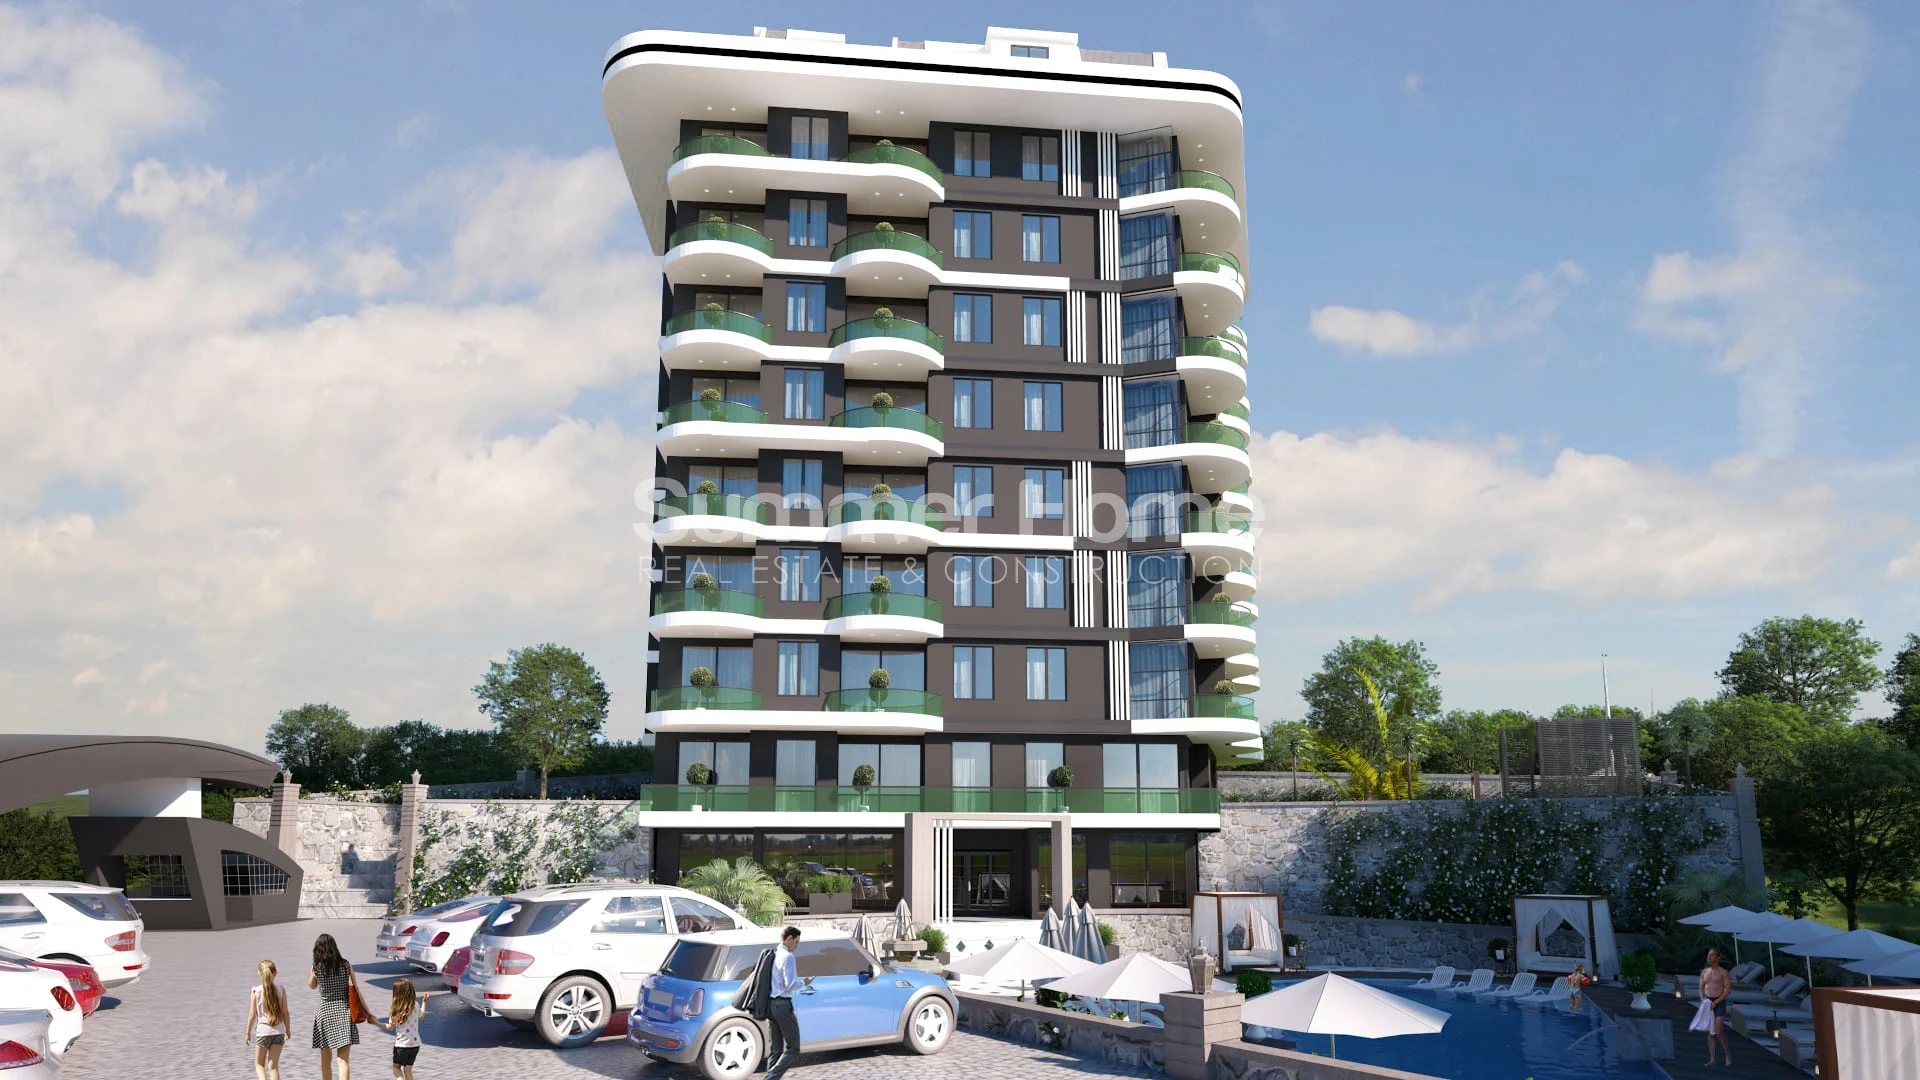 Elite and Stylish Apartments For Sale in Demirtas General - 11